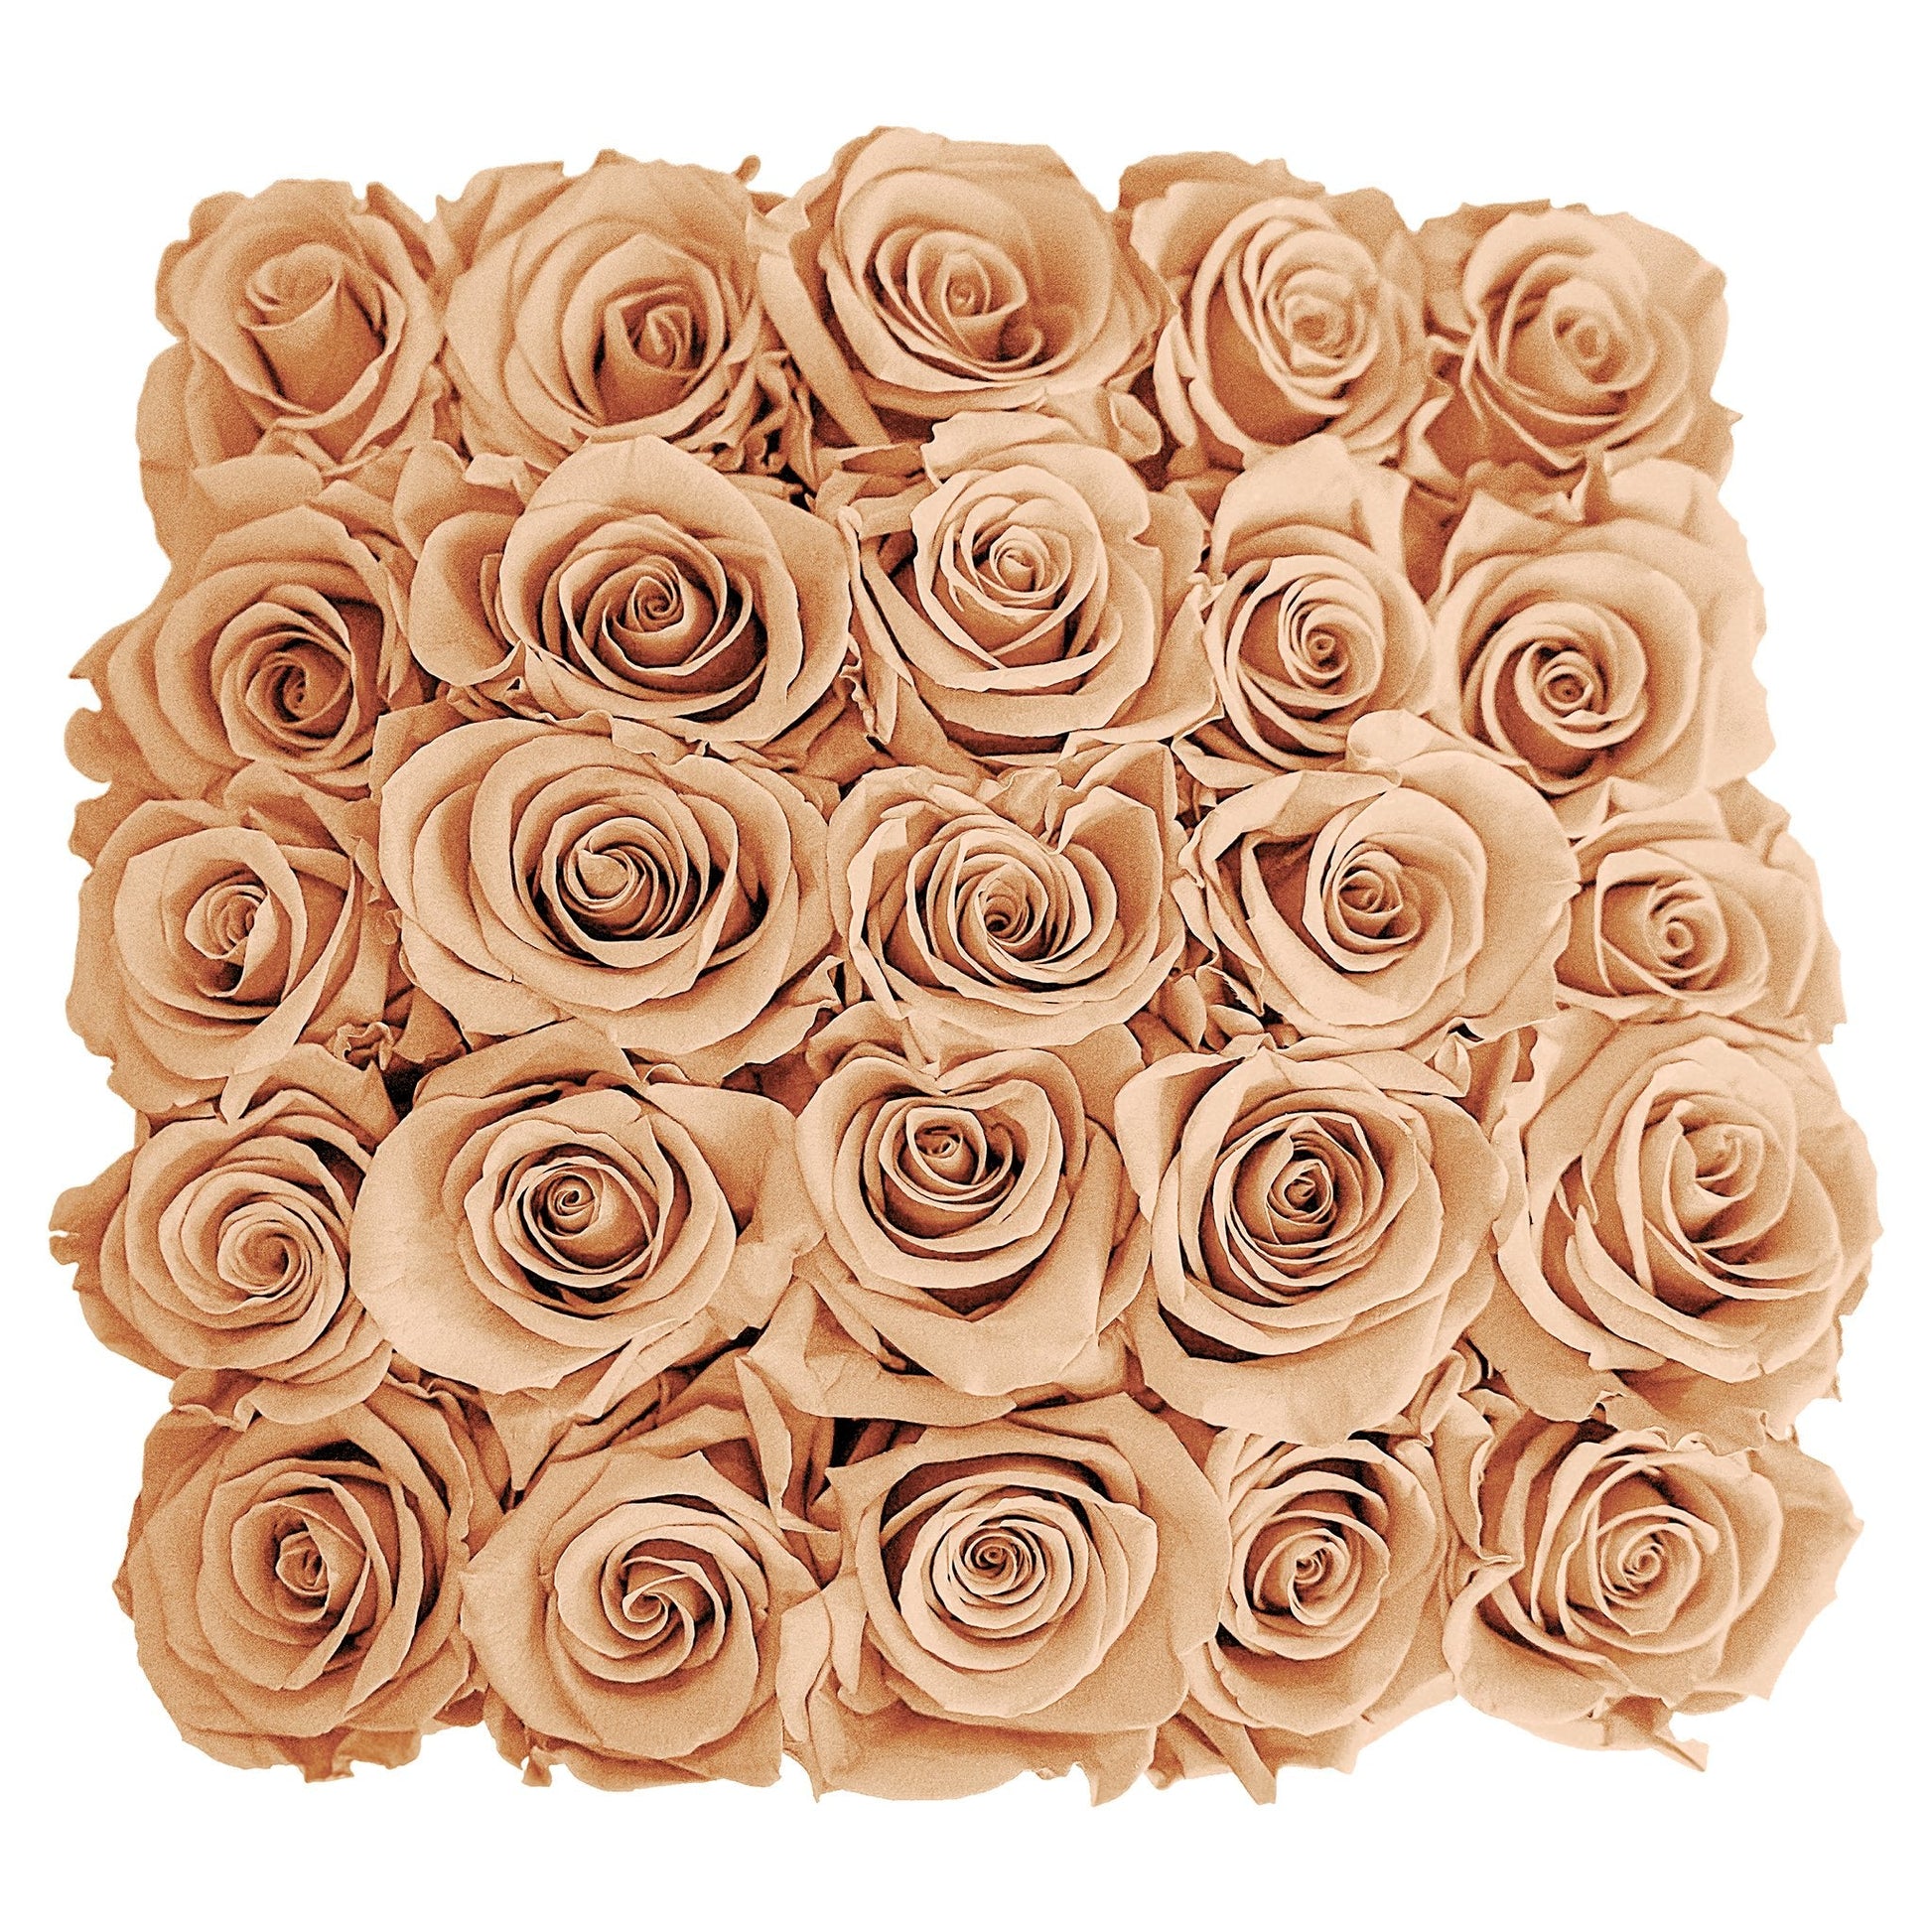 Preserved Roses Small Box | Peach - Floral Arrangement - Flower Delivery Brooklyn